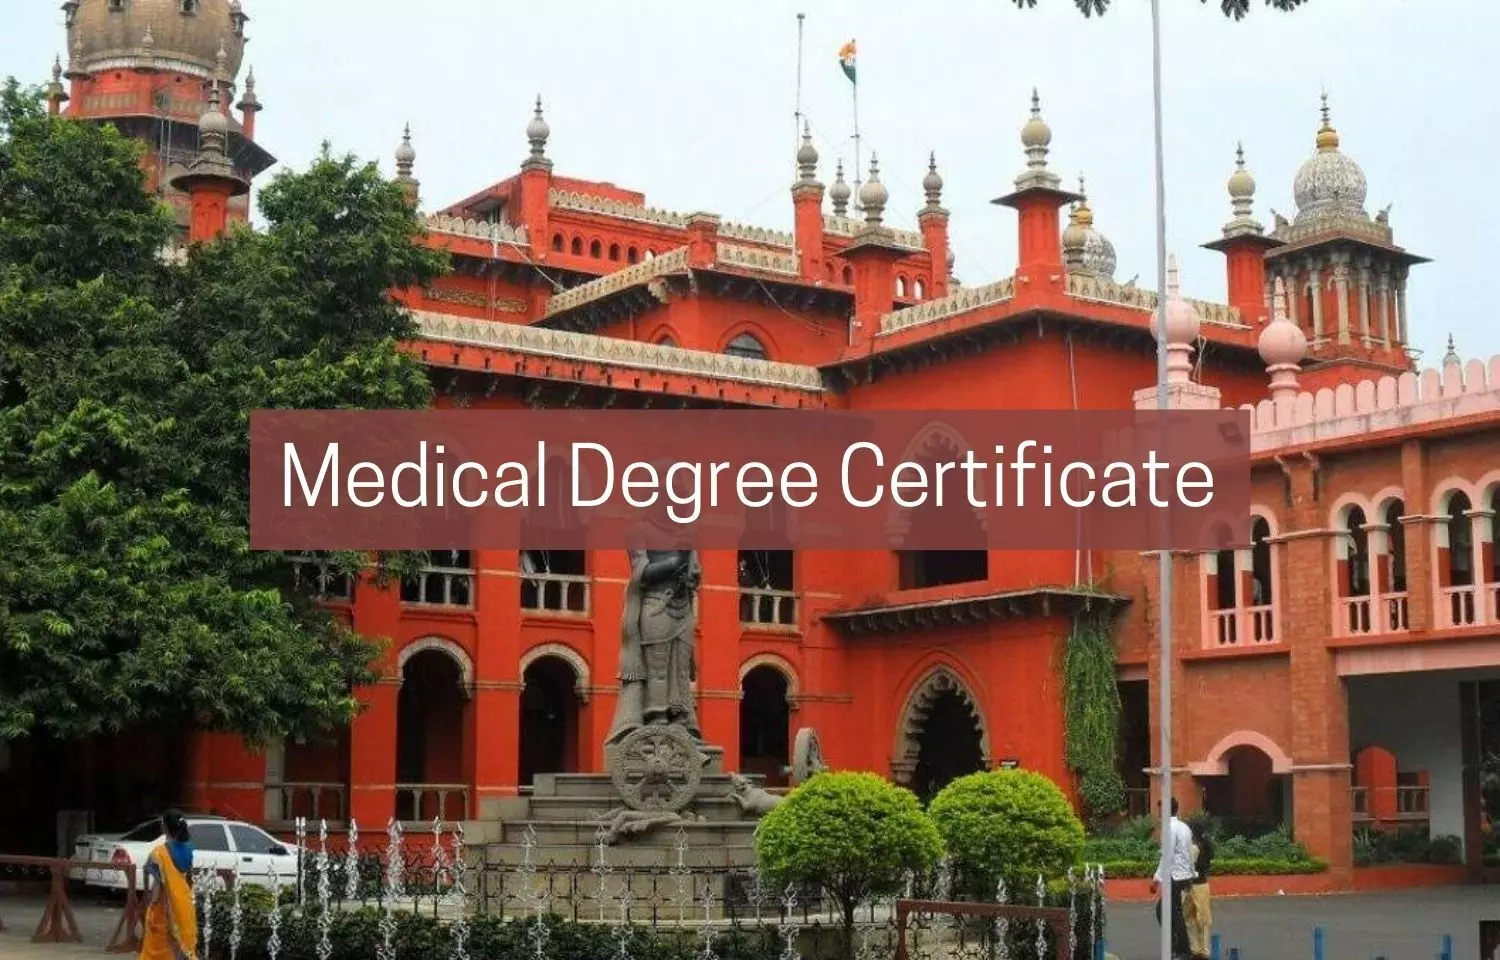 Medical Degree Certificate not Marketable Commodity, cannot be withheld for unfulfilled bond terms: HC